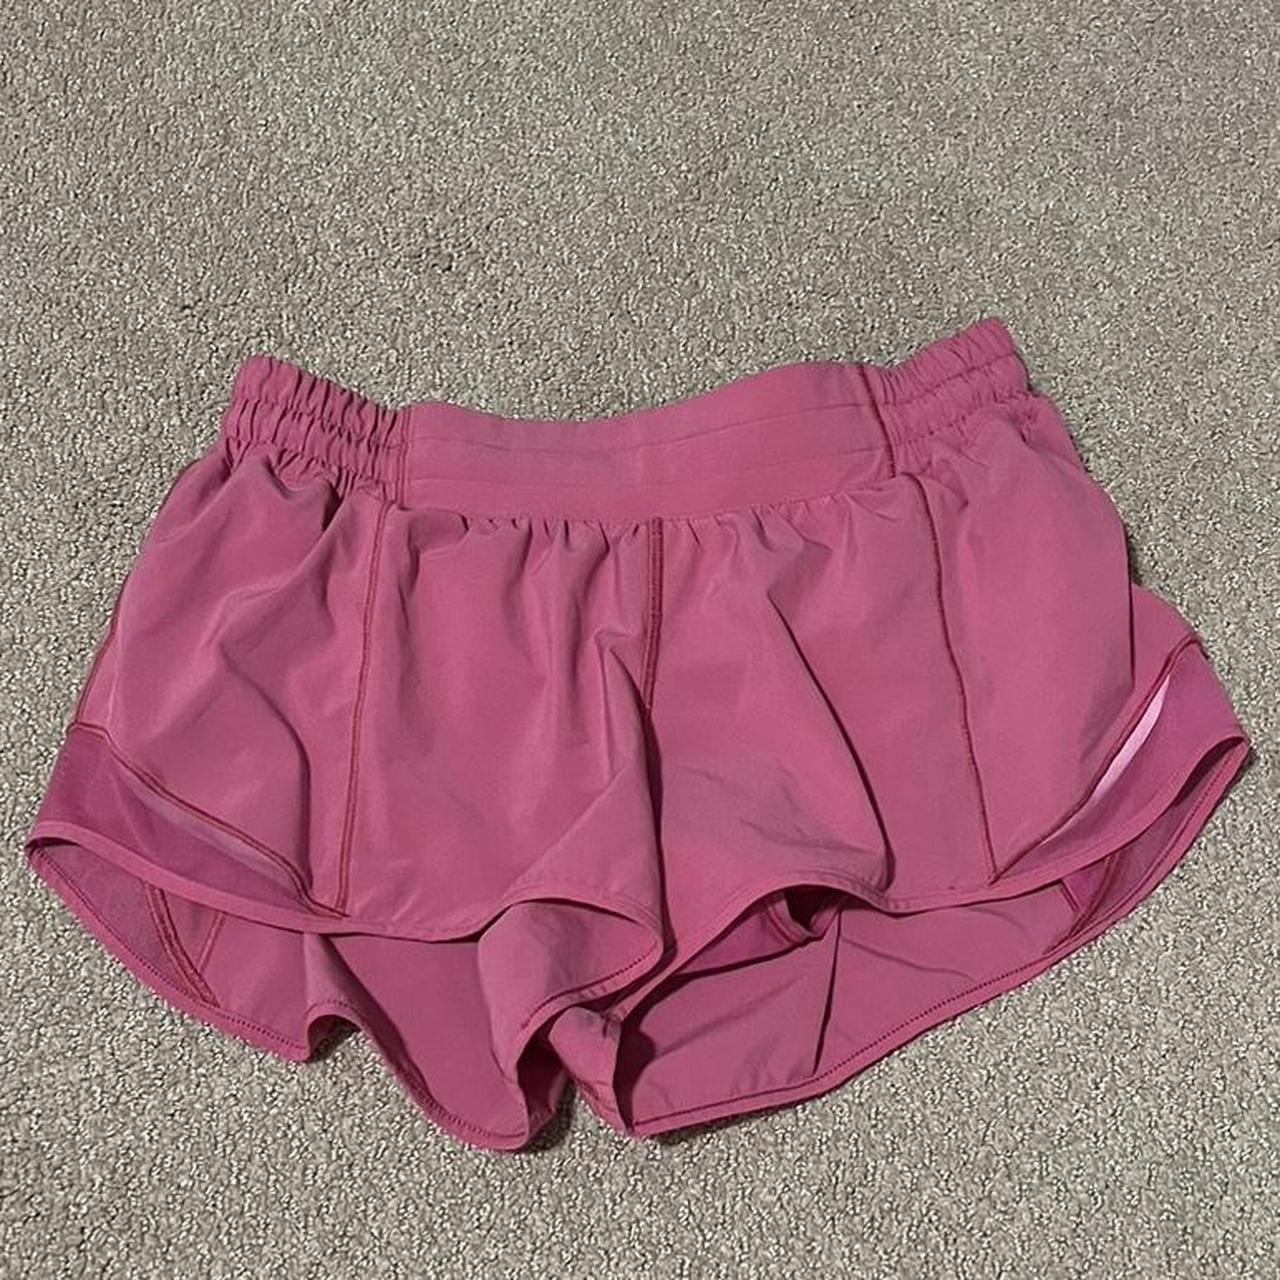 Sonic pink hotty hot shorts Size 8 Low rise 2.5... - Depop